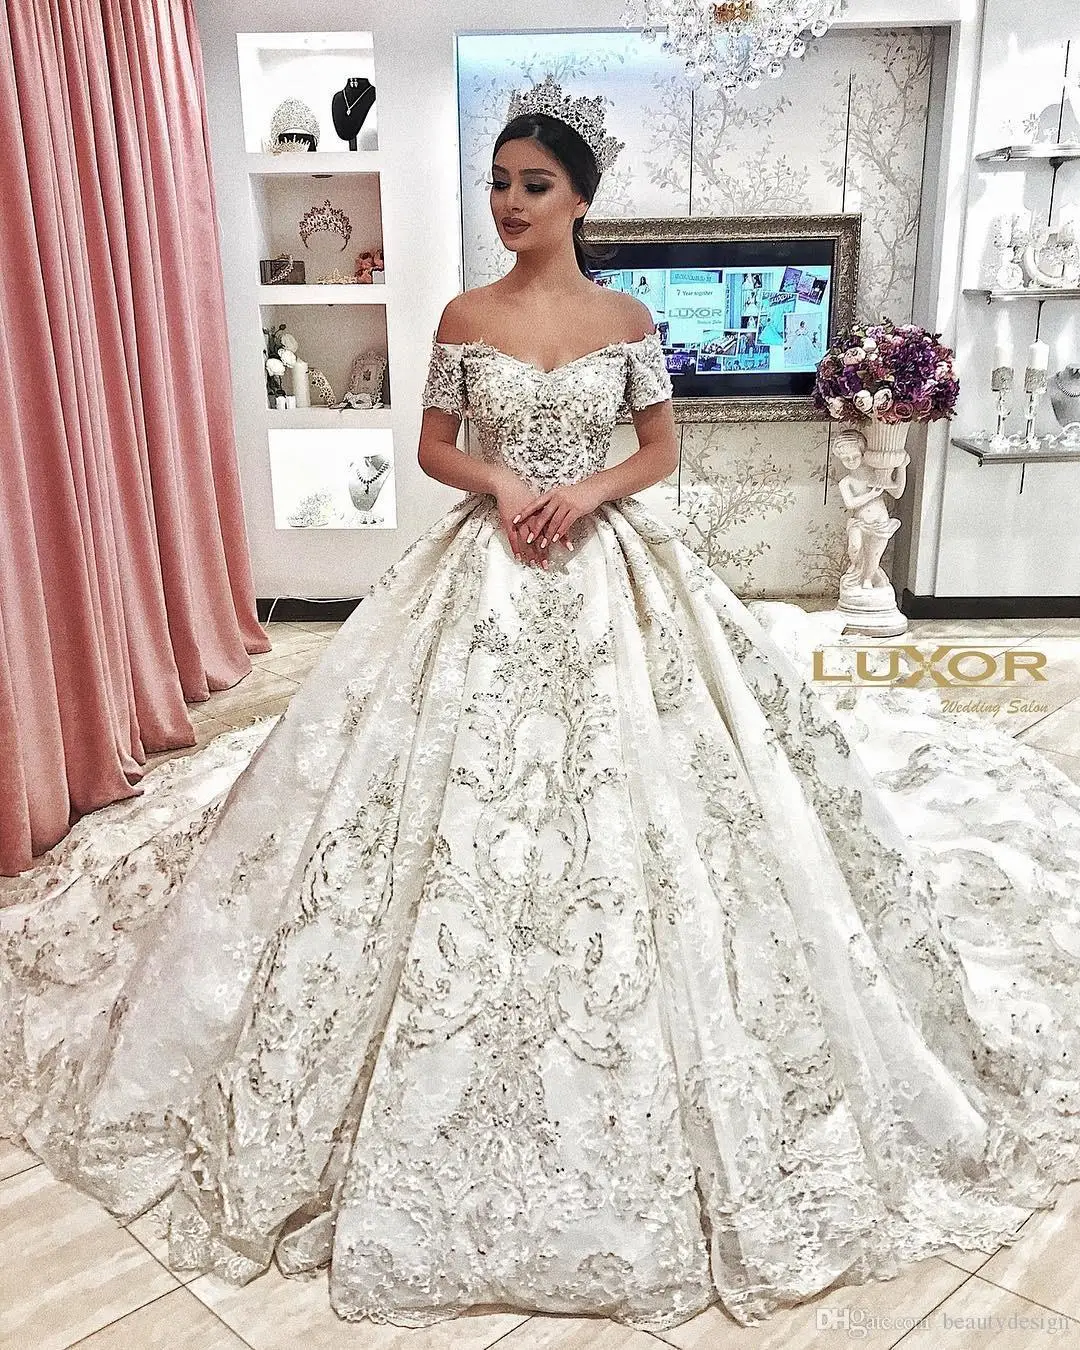 

Dubai Arabic Luxury Sparkly 2019Ivory Wedding Dresses Sexy Bling Beaded Lace Applique Sleeves Chapel Bridal Gowns wedding dress